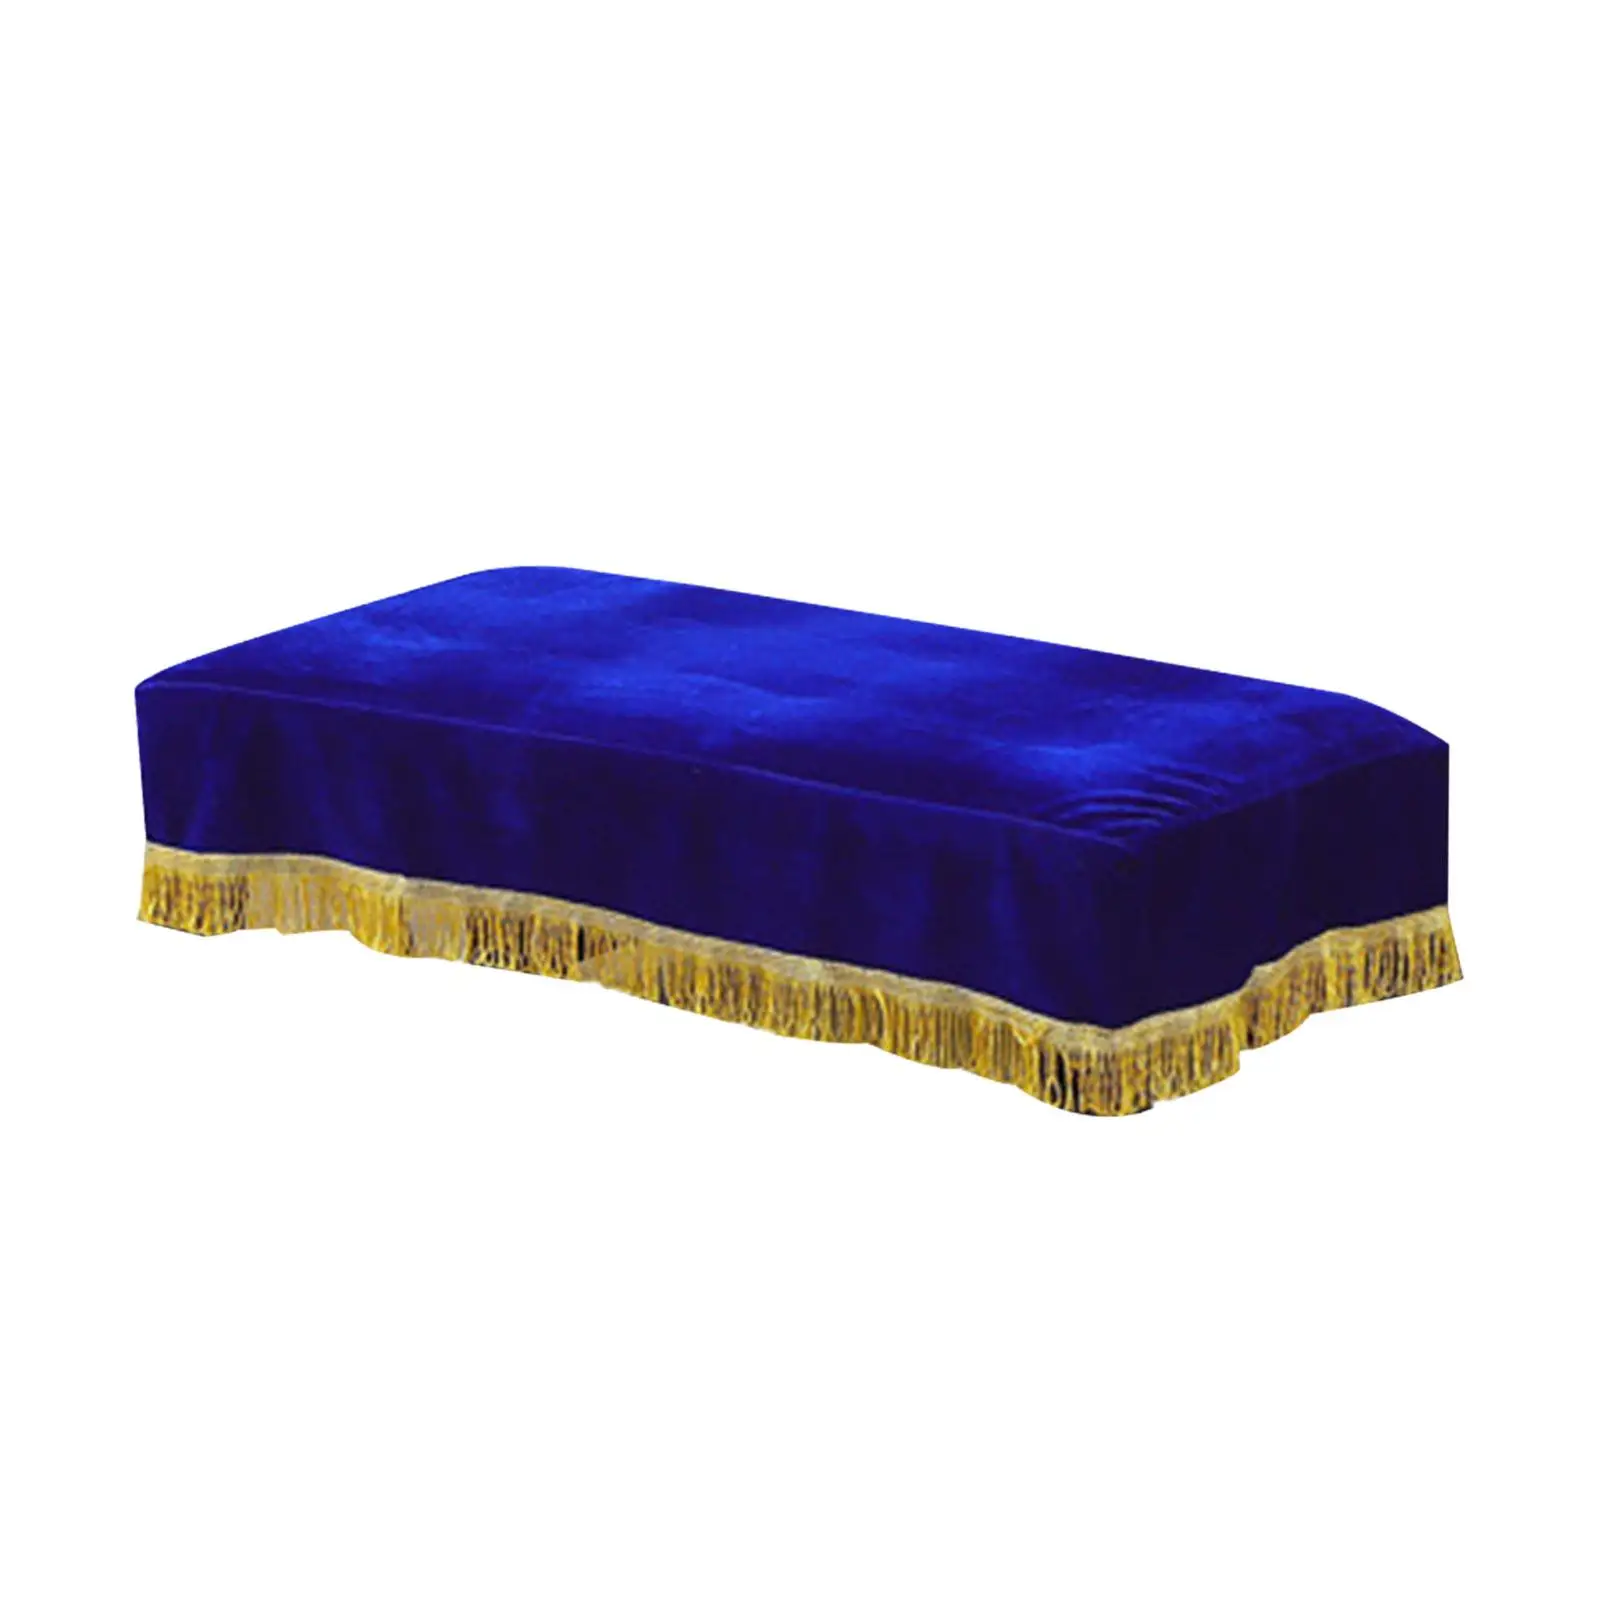 European Piano Bench Cover Fashionable Dustproof Exquisite Dust Cover Bench Slipcover for Household Bar Living Room Home Office